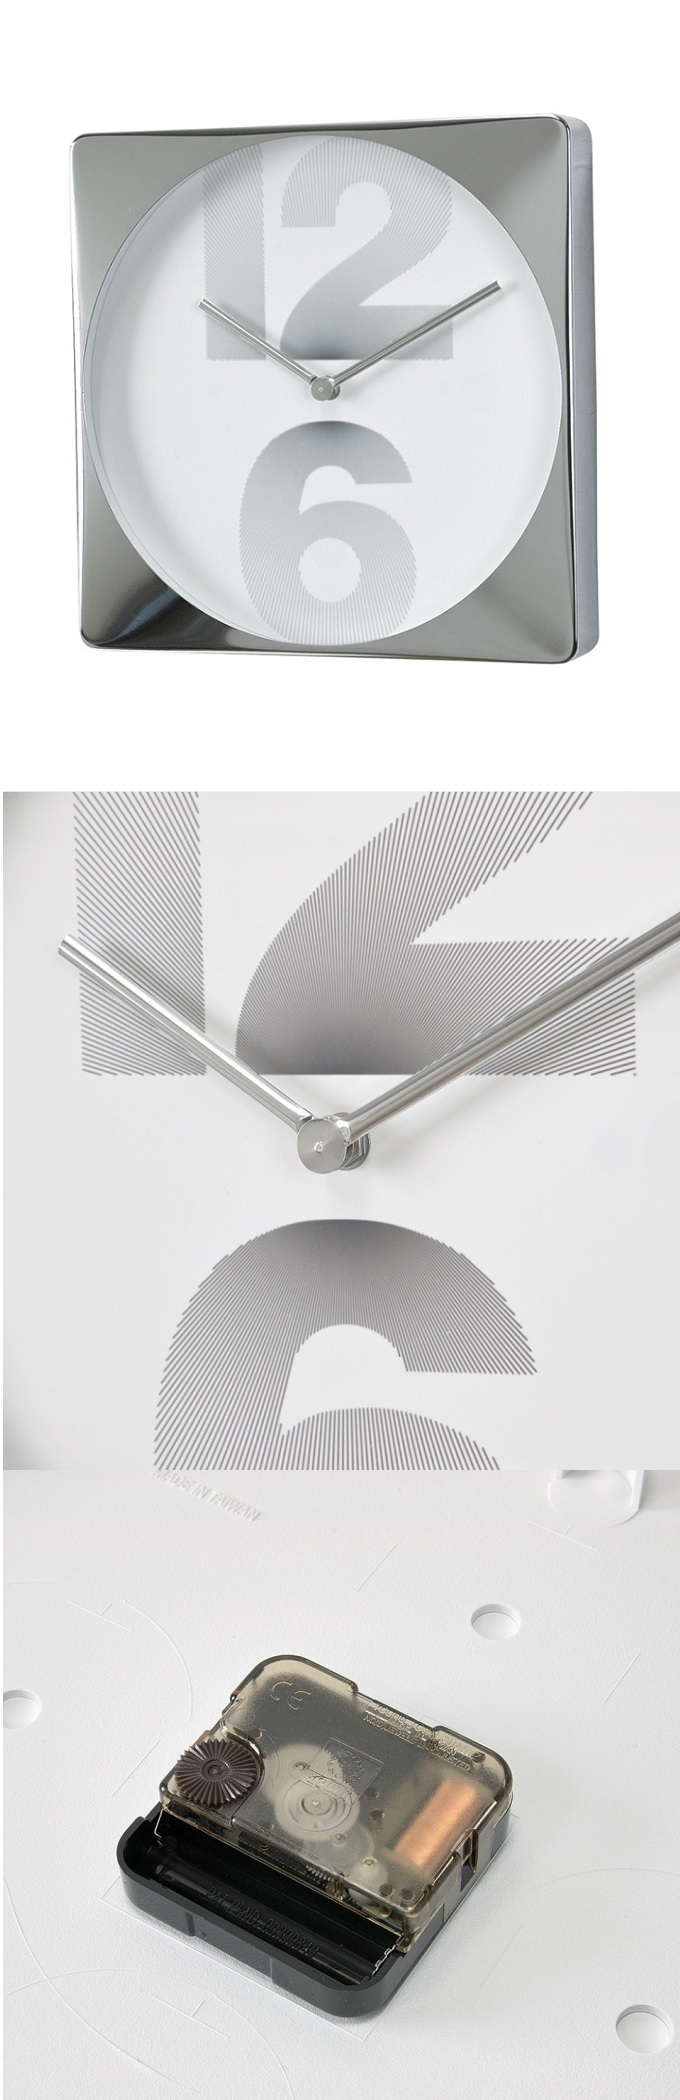 EDGE NUMBER SQUARE WALL CLOCK SILVER 30cm